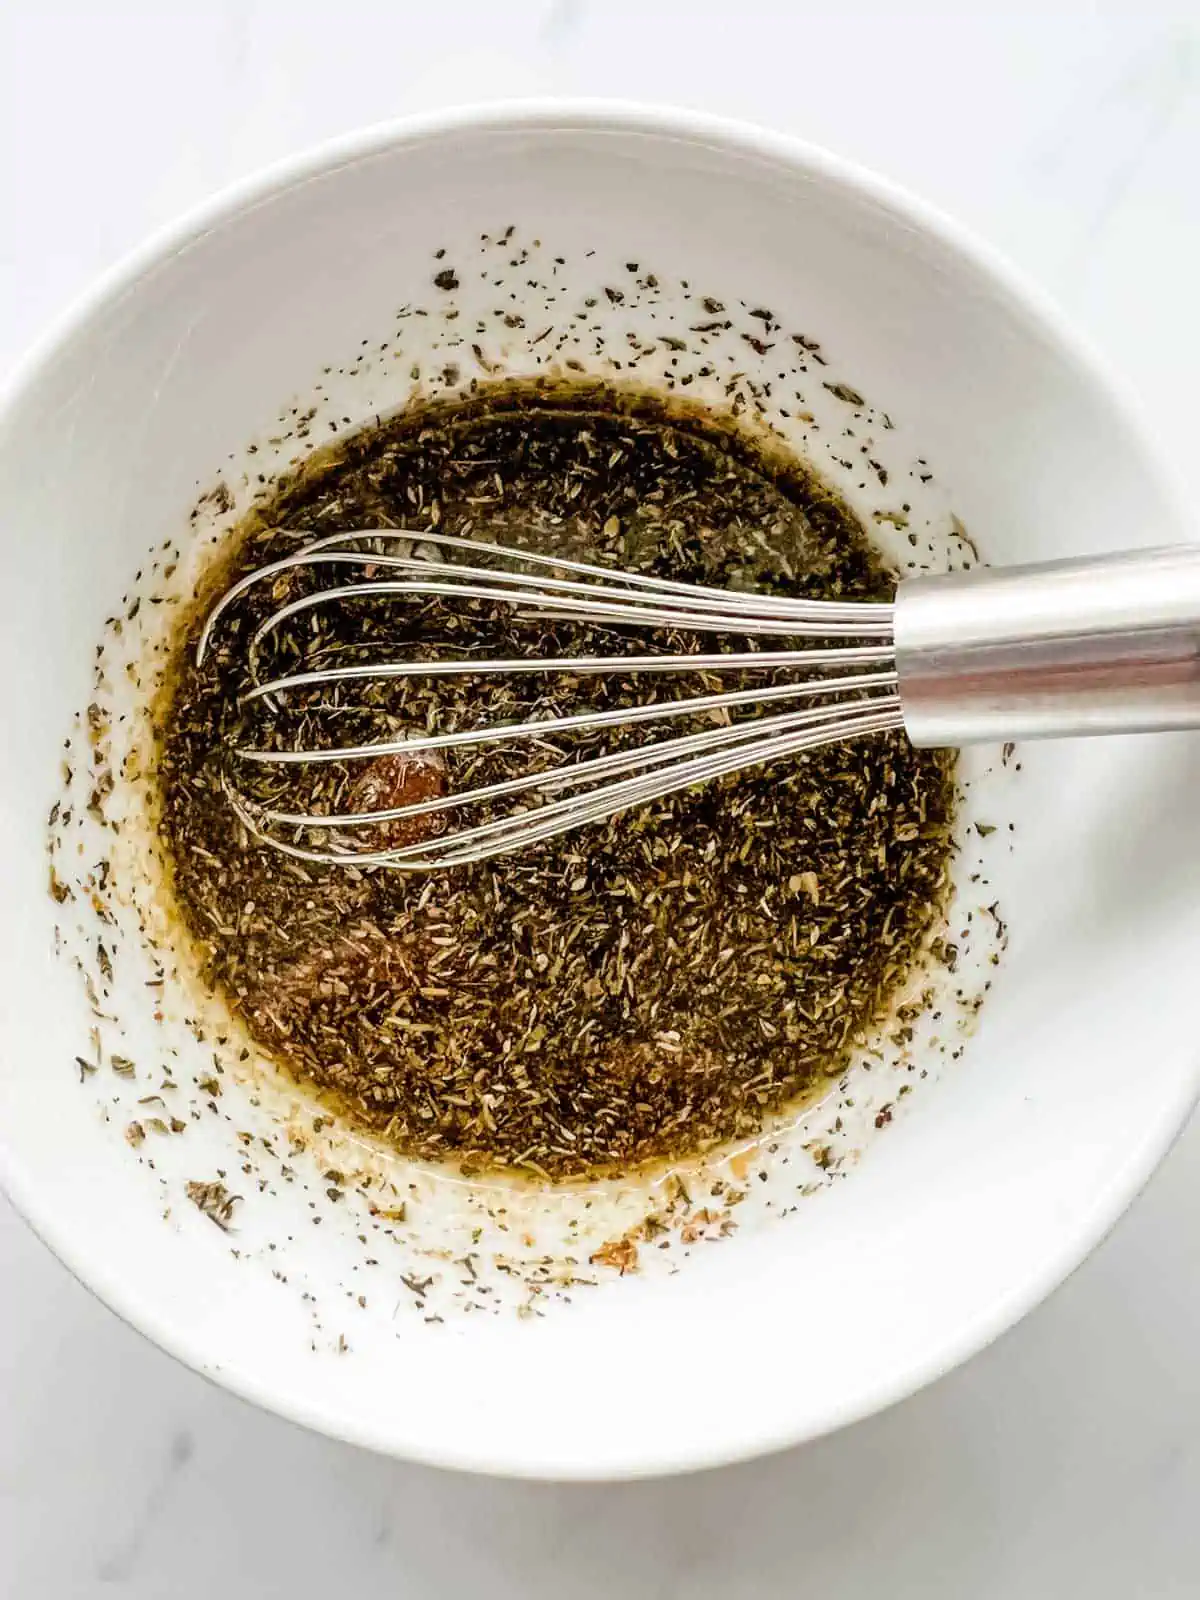 Photo of salmon marinade being whisked together in a bowl.